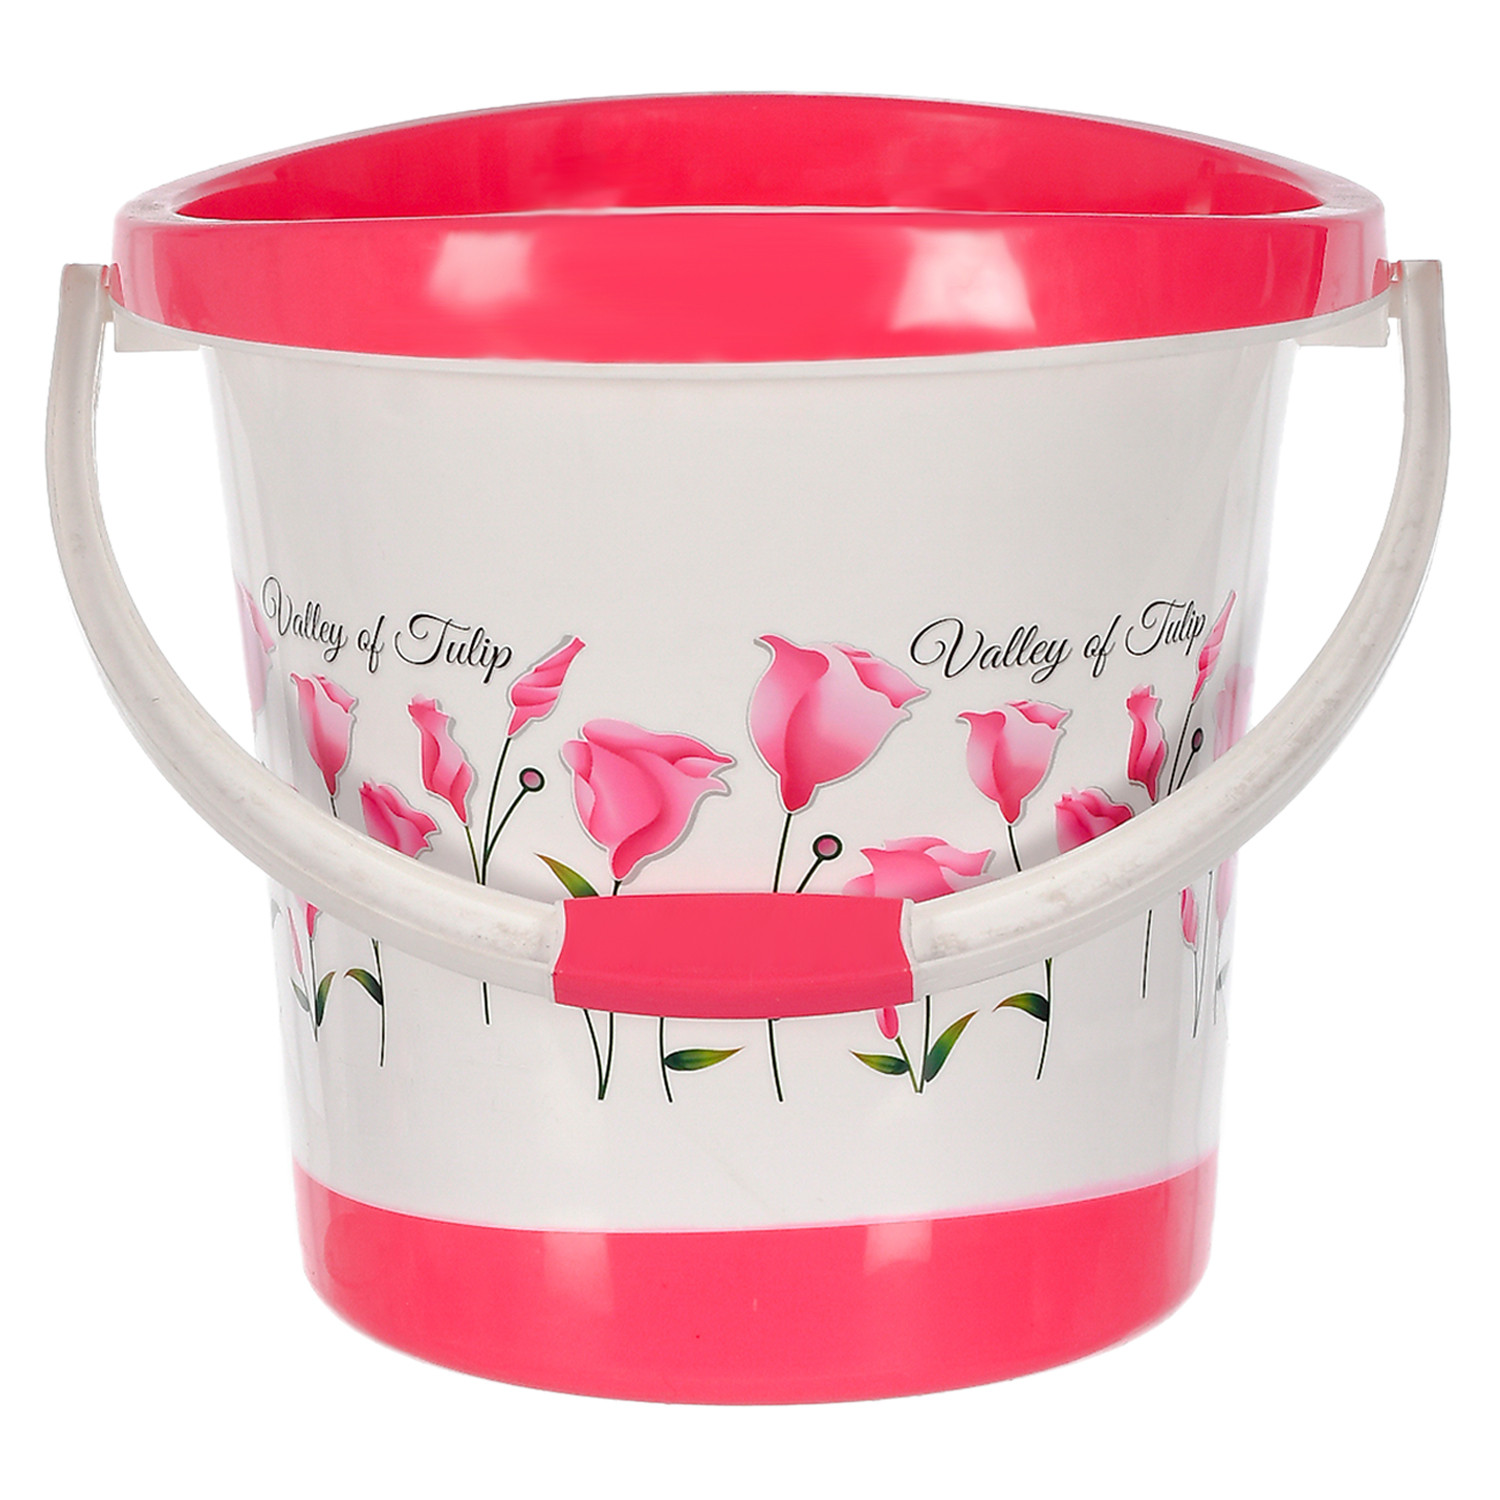 Kuber Industries Multiuses Floral Print Plastic Bucket With Handle, 18 litre (Pink & White)-46KM0371